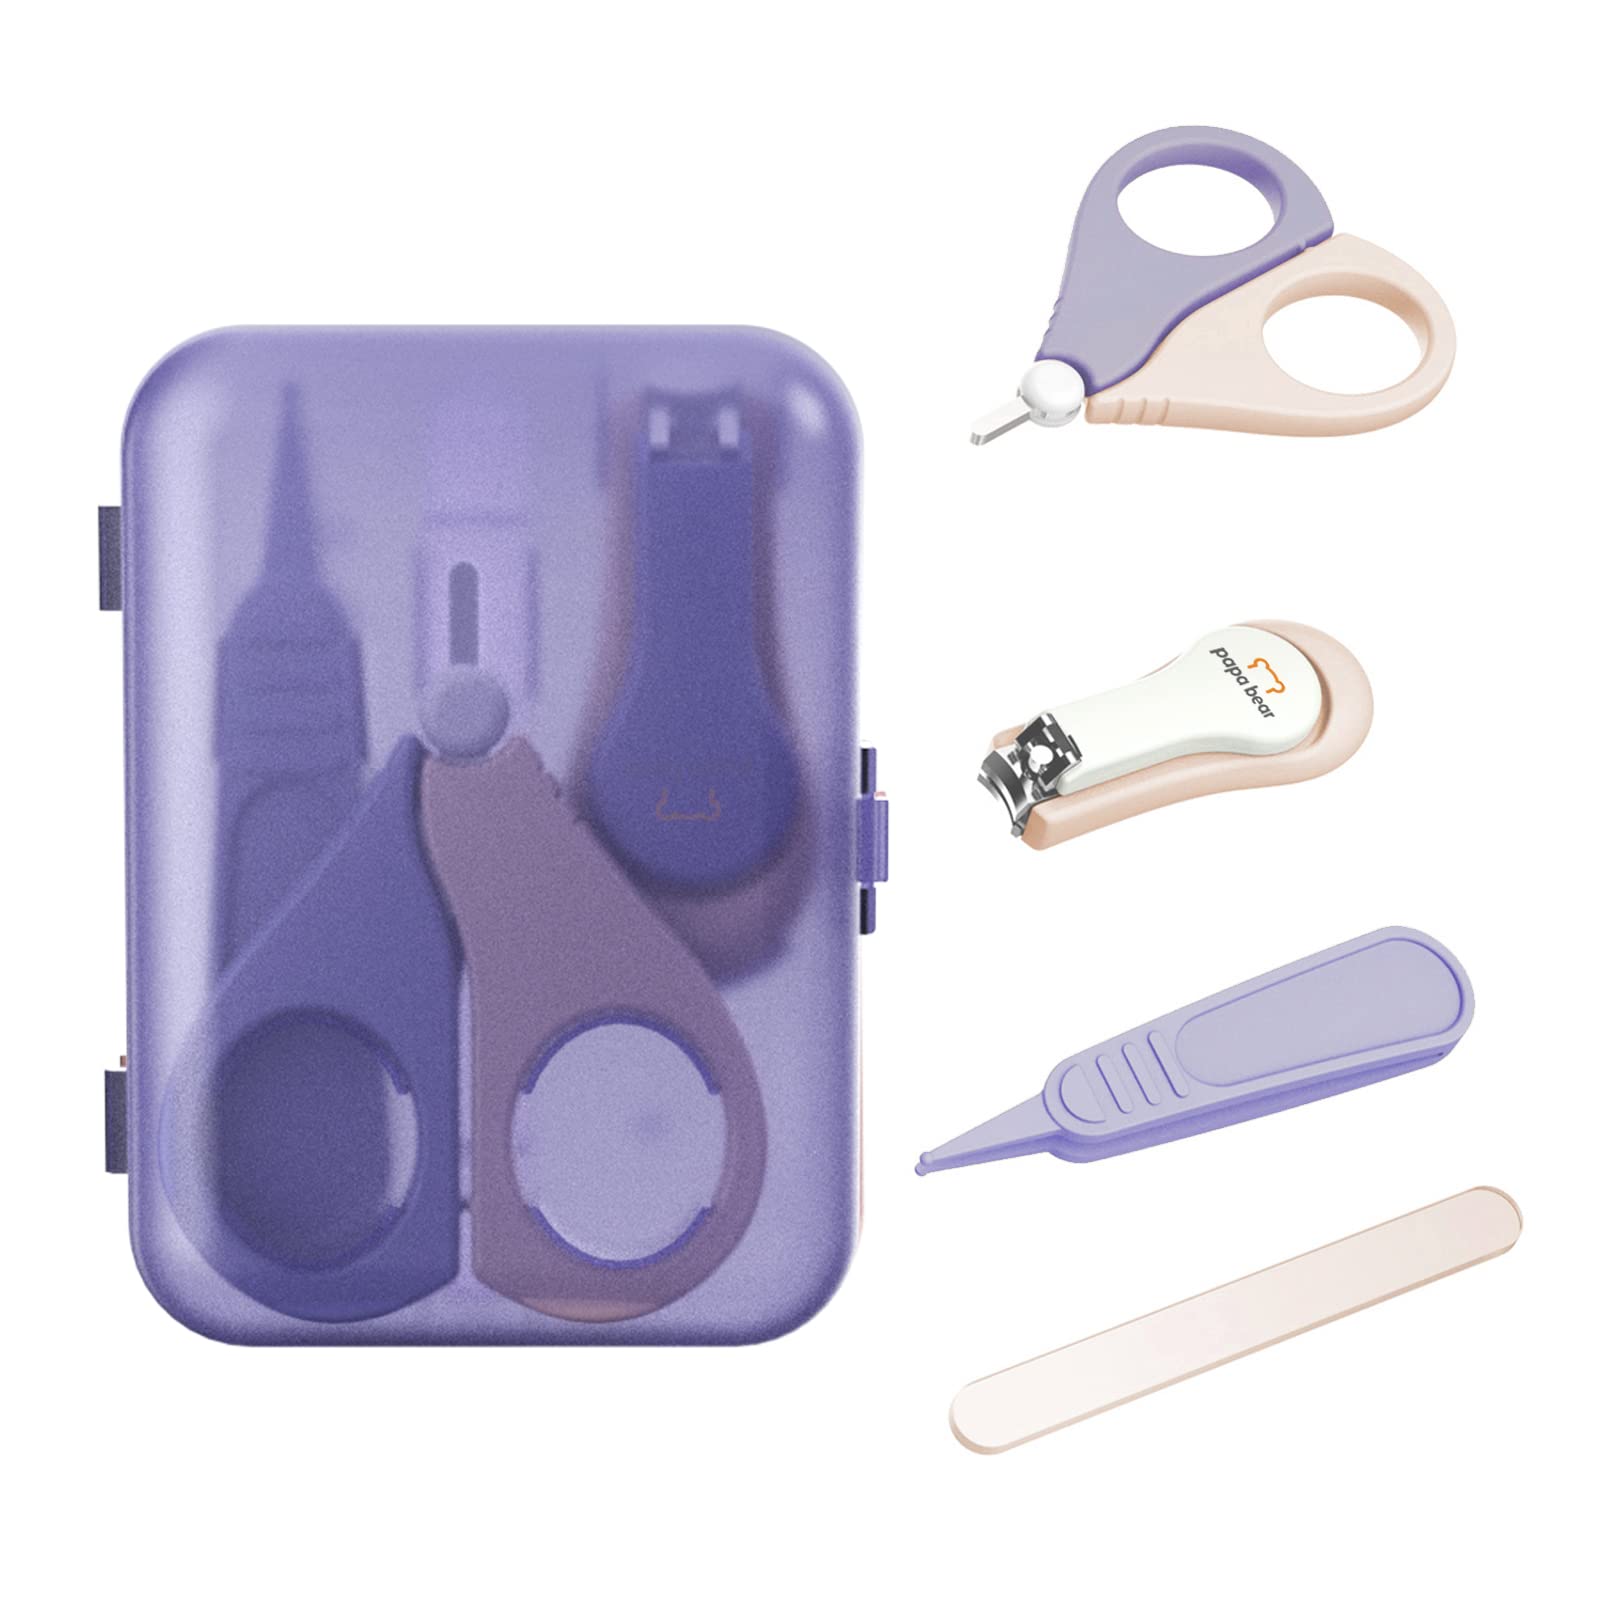 To Buy For Newborn|baby Nail Care Kit - 4pcs Set With Nail Clippers,  Scissors, File & Tweezers